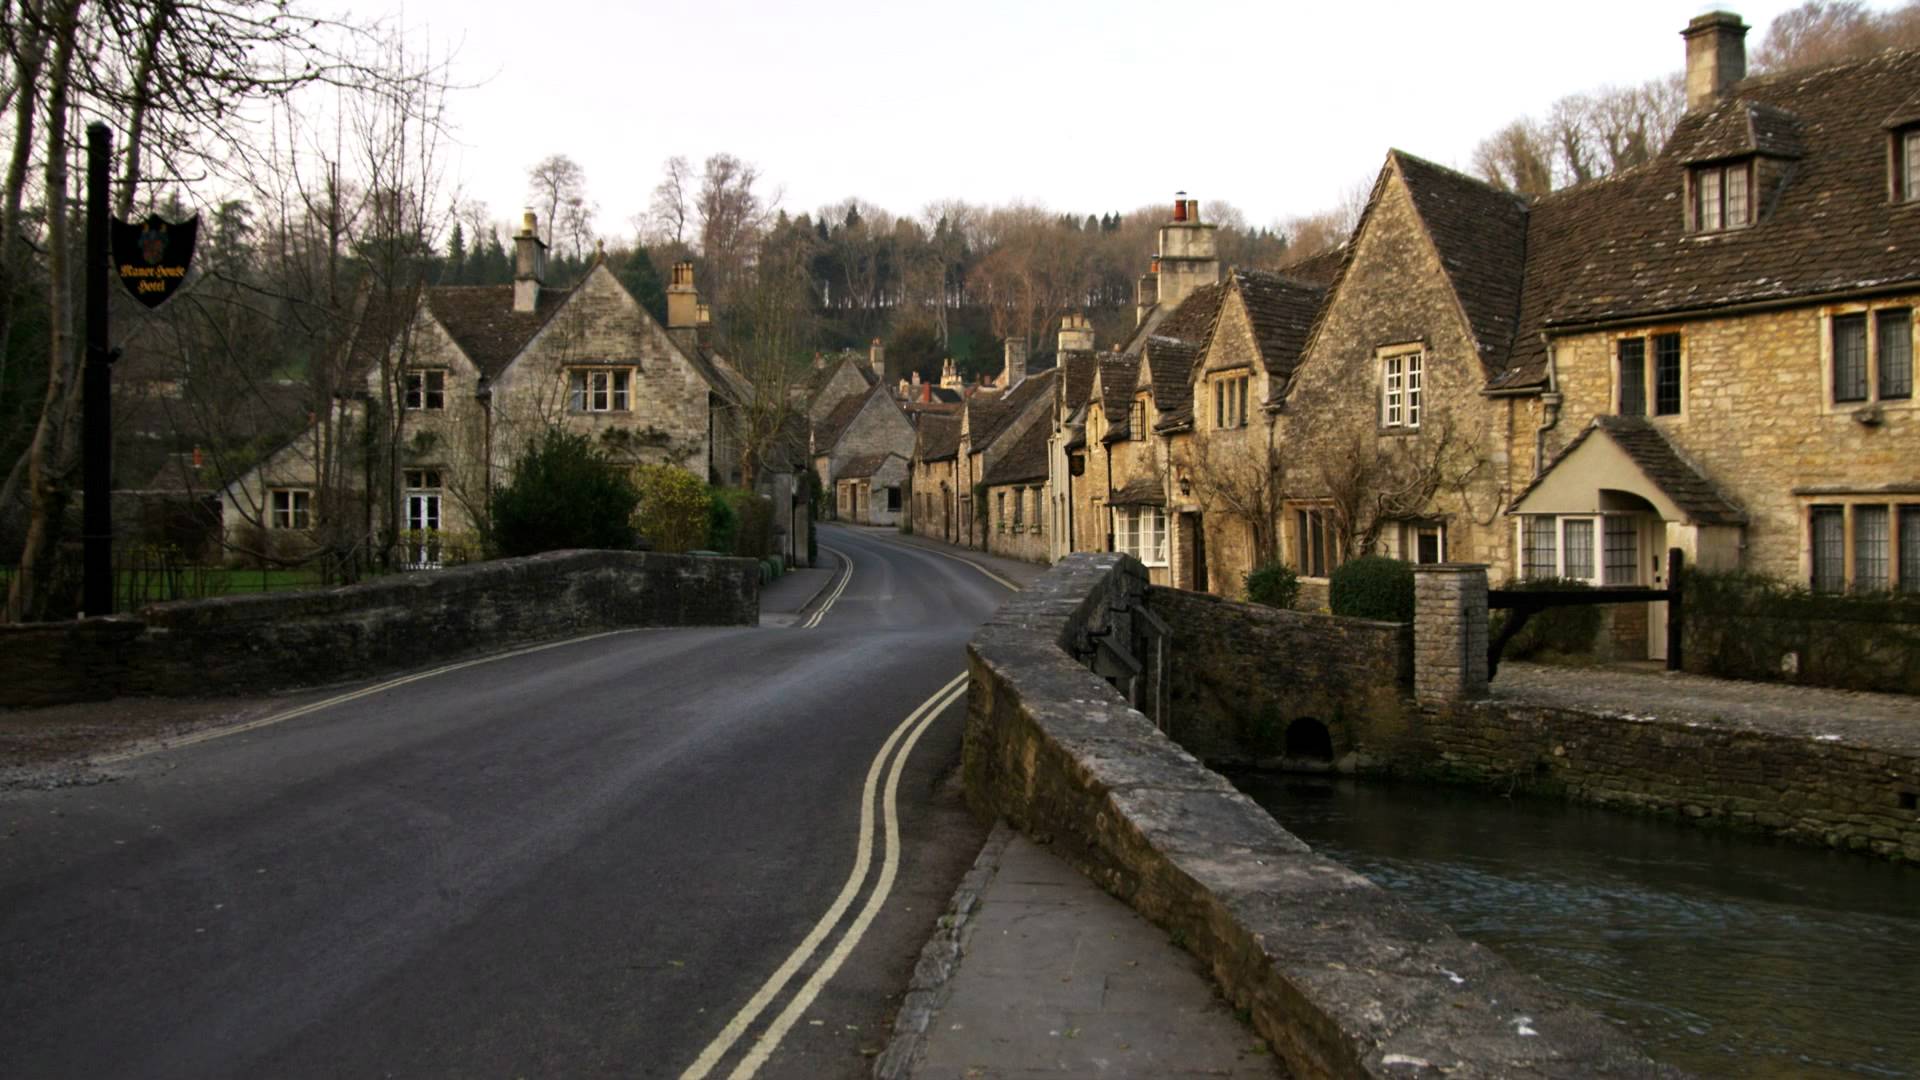 Royalty Free Stock Footage of Old village in England. - YouTube